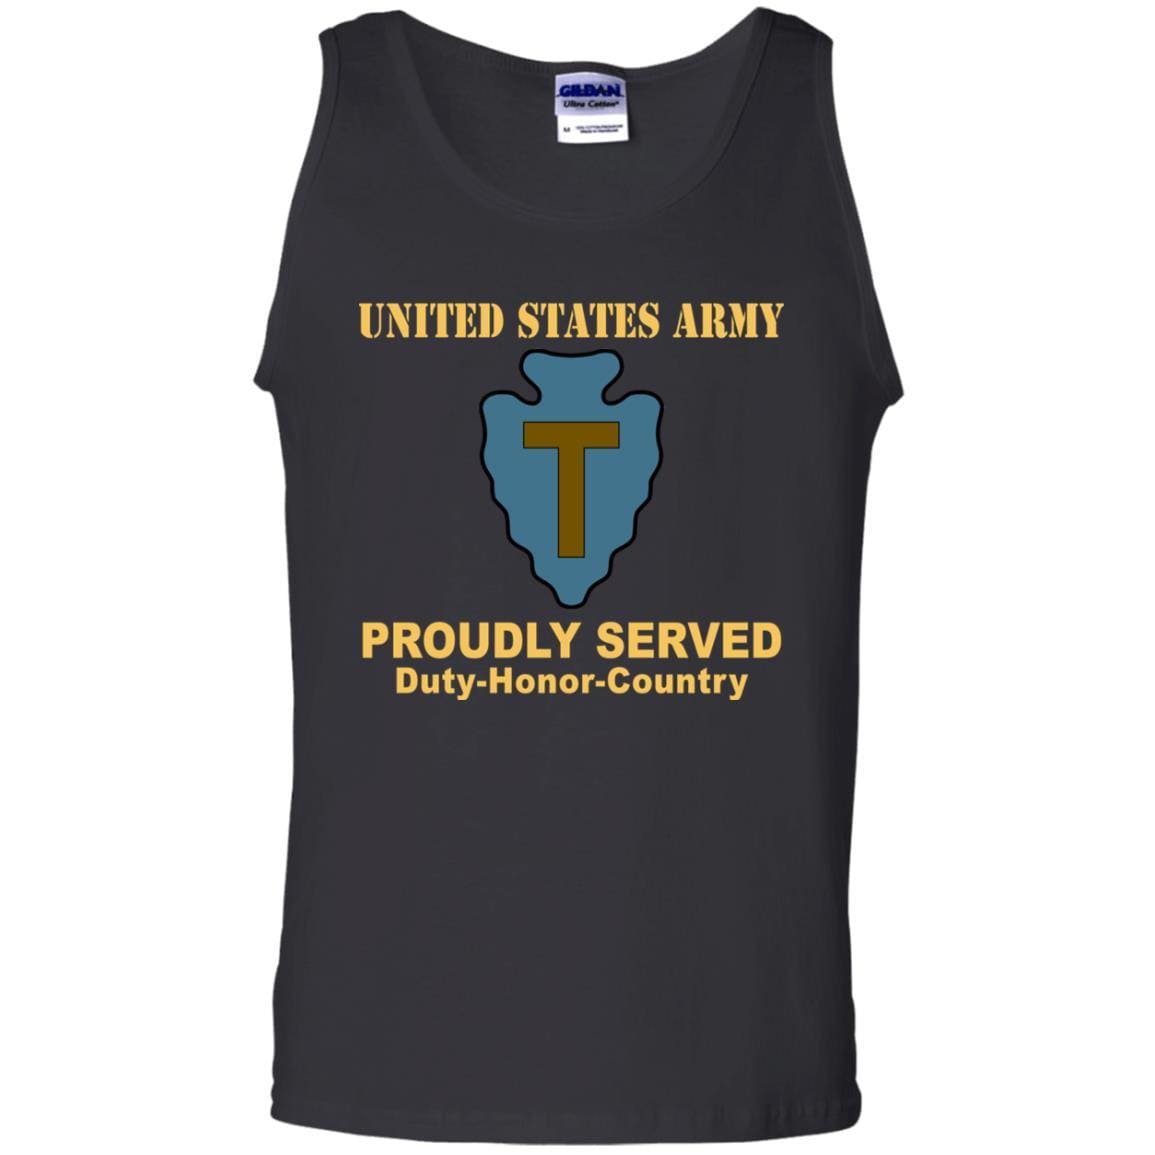 US ARMY 36TH INFANTRY DIVISION - Proudly Served T-Shirt On Front For Men-TShirt-Army-Veterans Nation